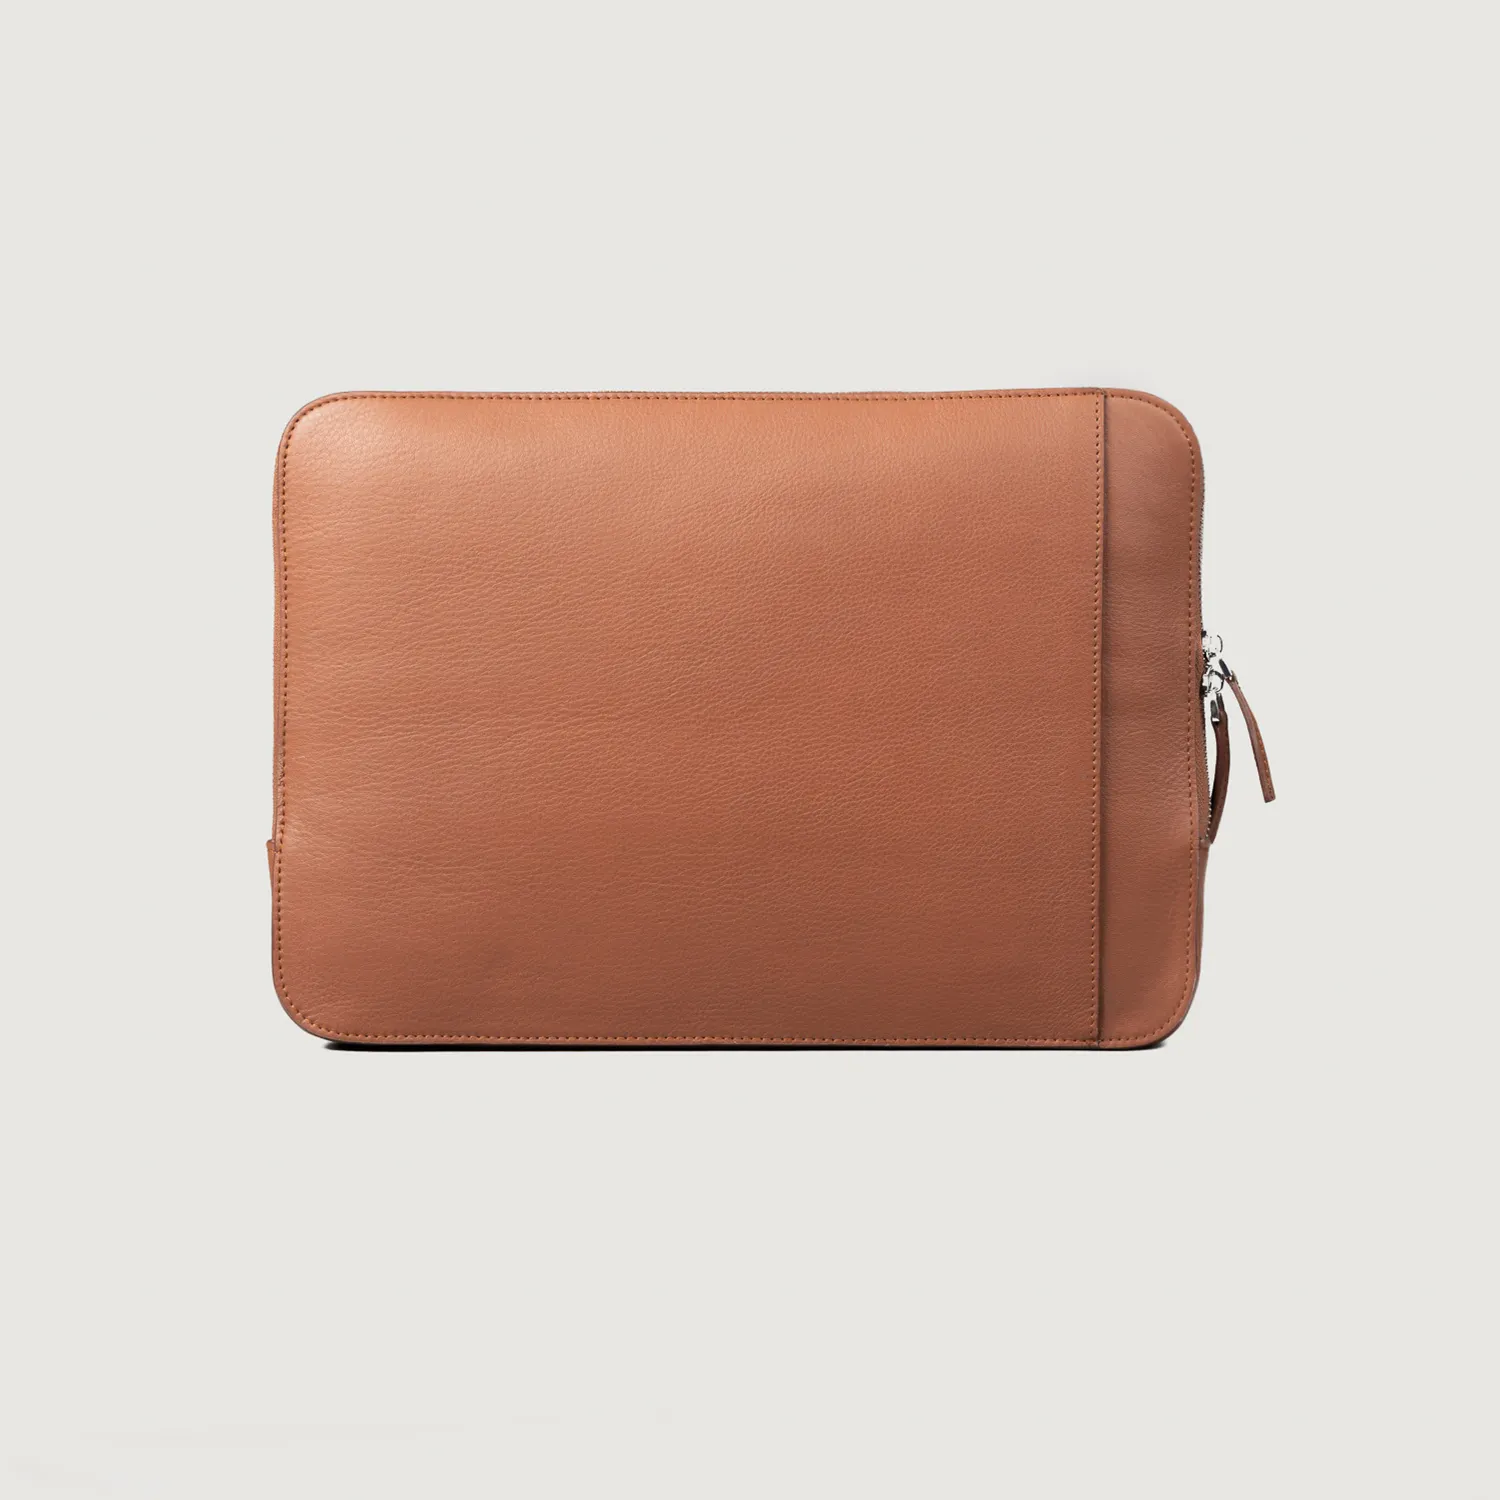 Full Grain Naturally Milled Cowhide Leather Baxter Brown Laptop Sleeve with Open Slip Pocket Trolley Strap and Cotton Twill